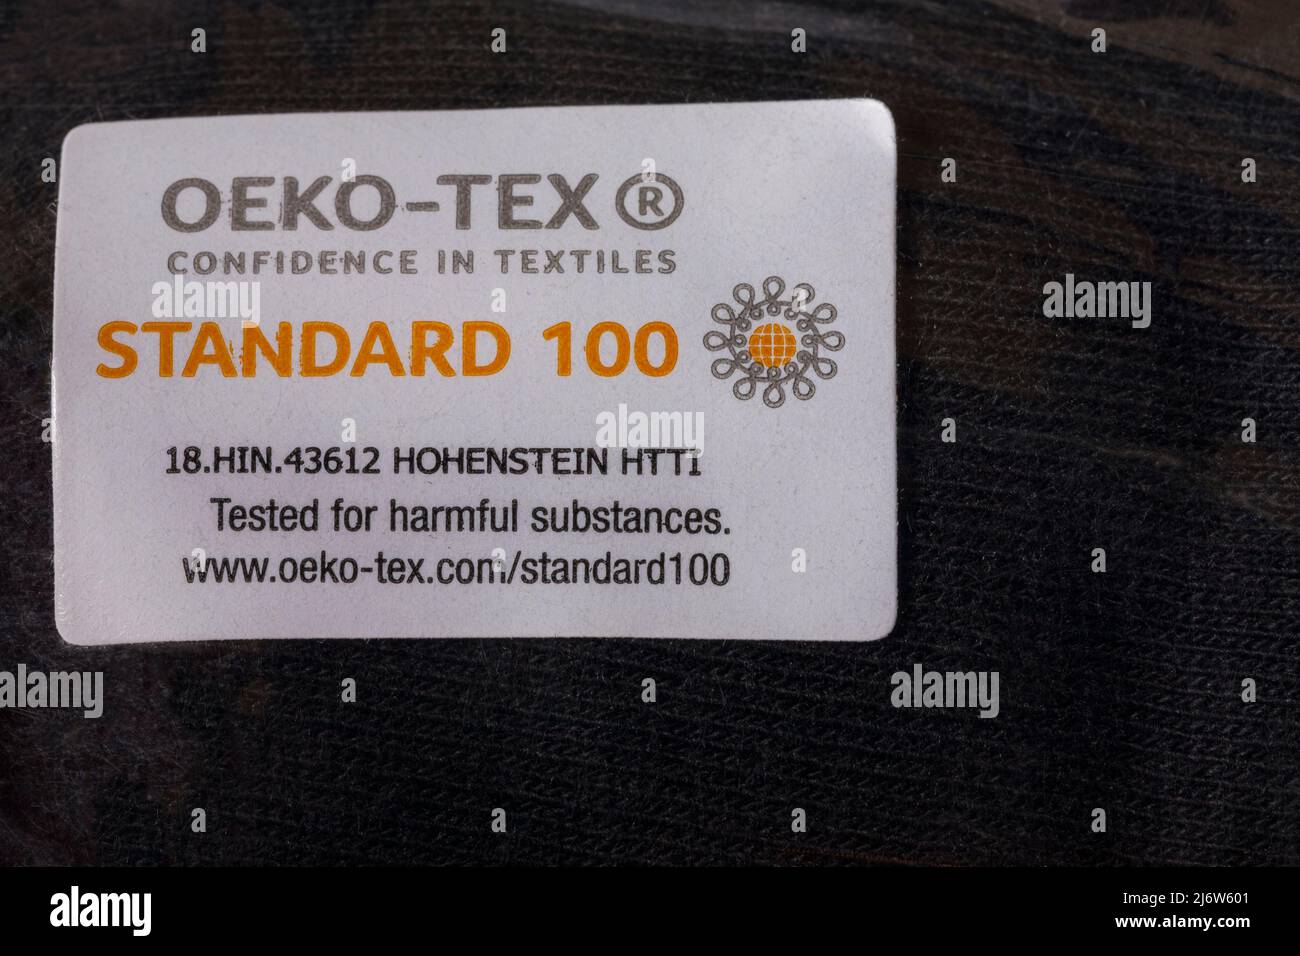 Oeko-tex confidence in textiles Standard 100 tested for harmful substances  - detail on label on textile fabric material Stock Photo - Alamy